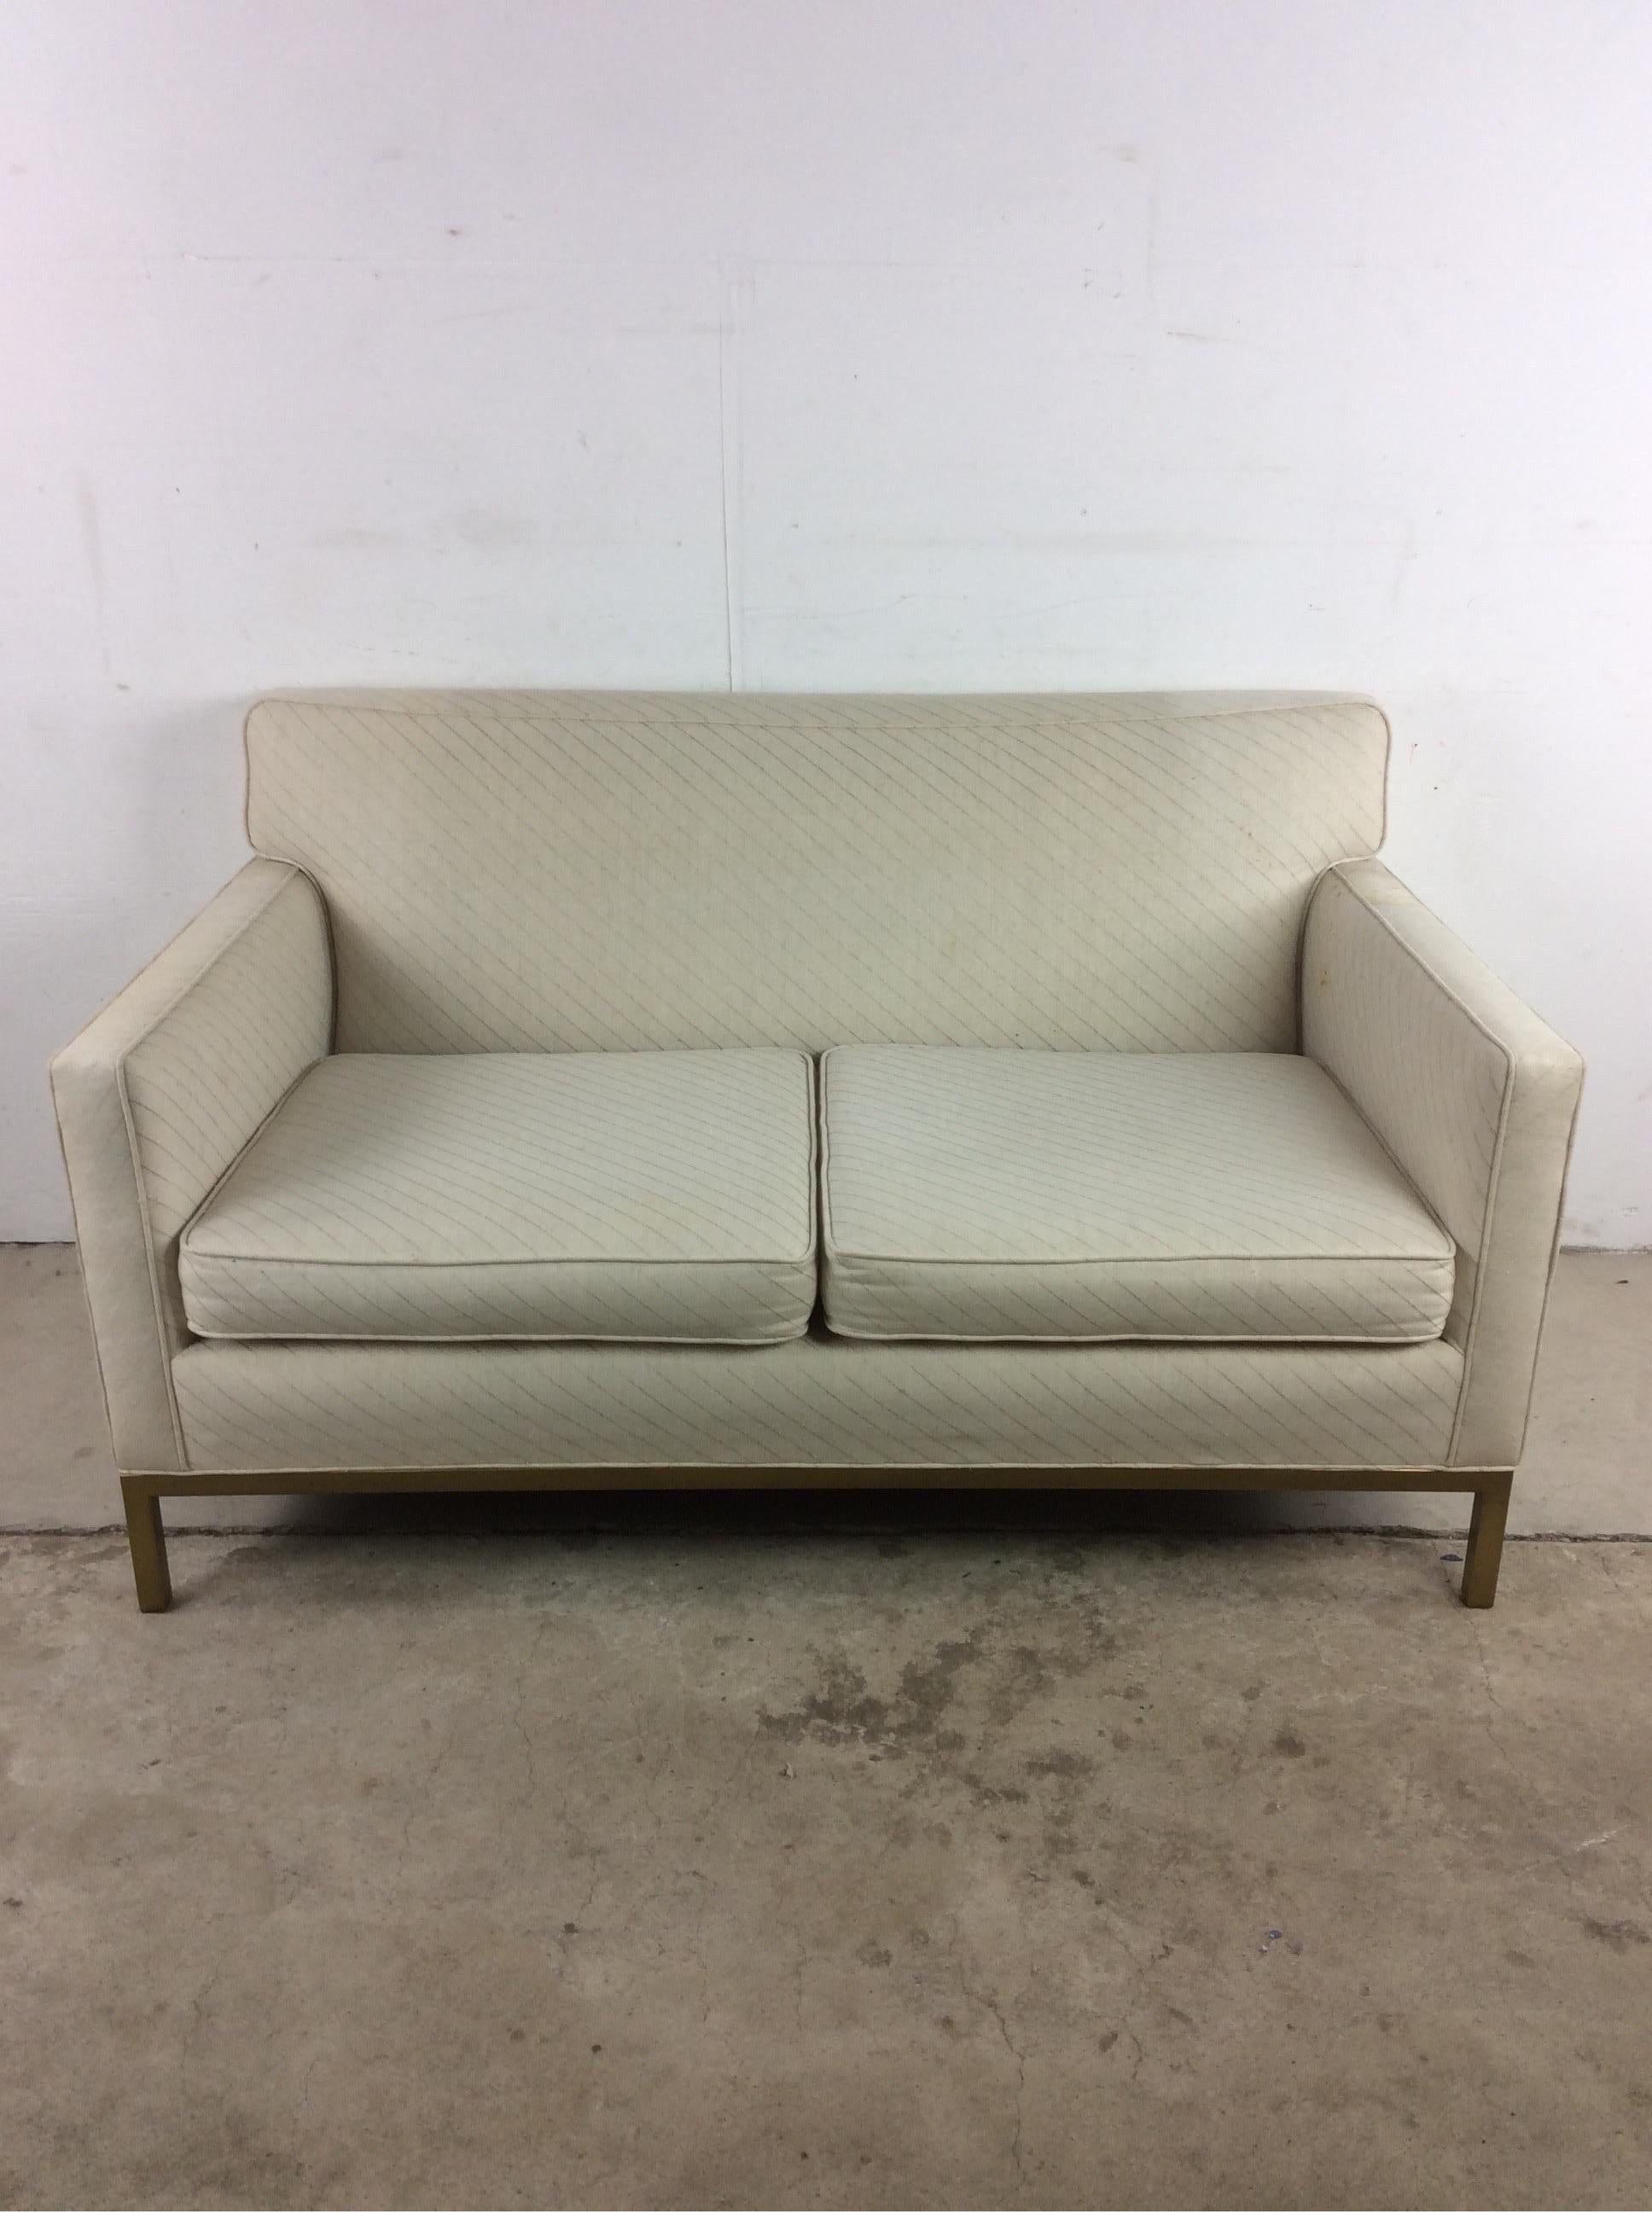 Mid-20th Century Midcentury Loveseat Sofa with Brass Base For Sale